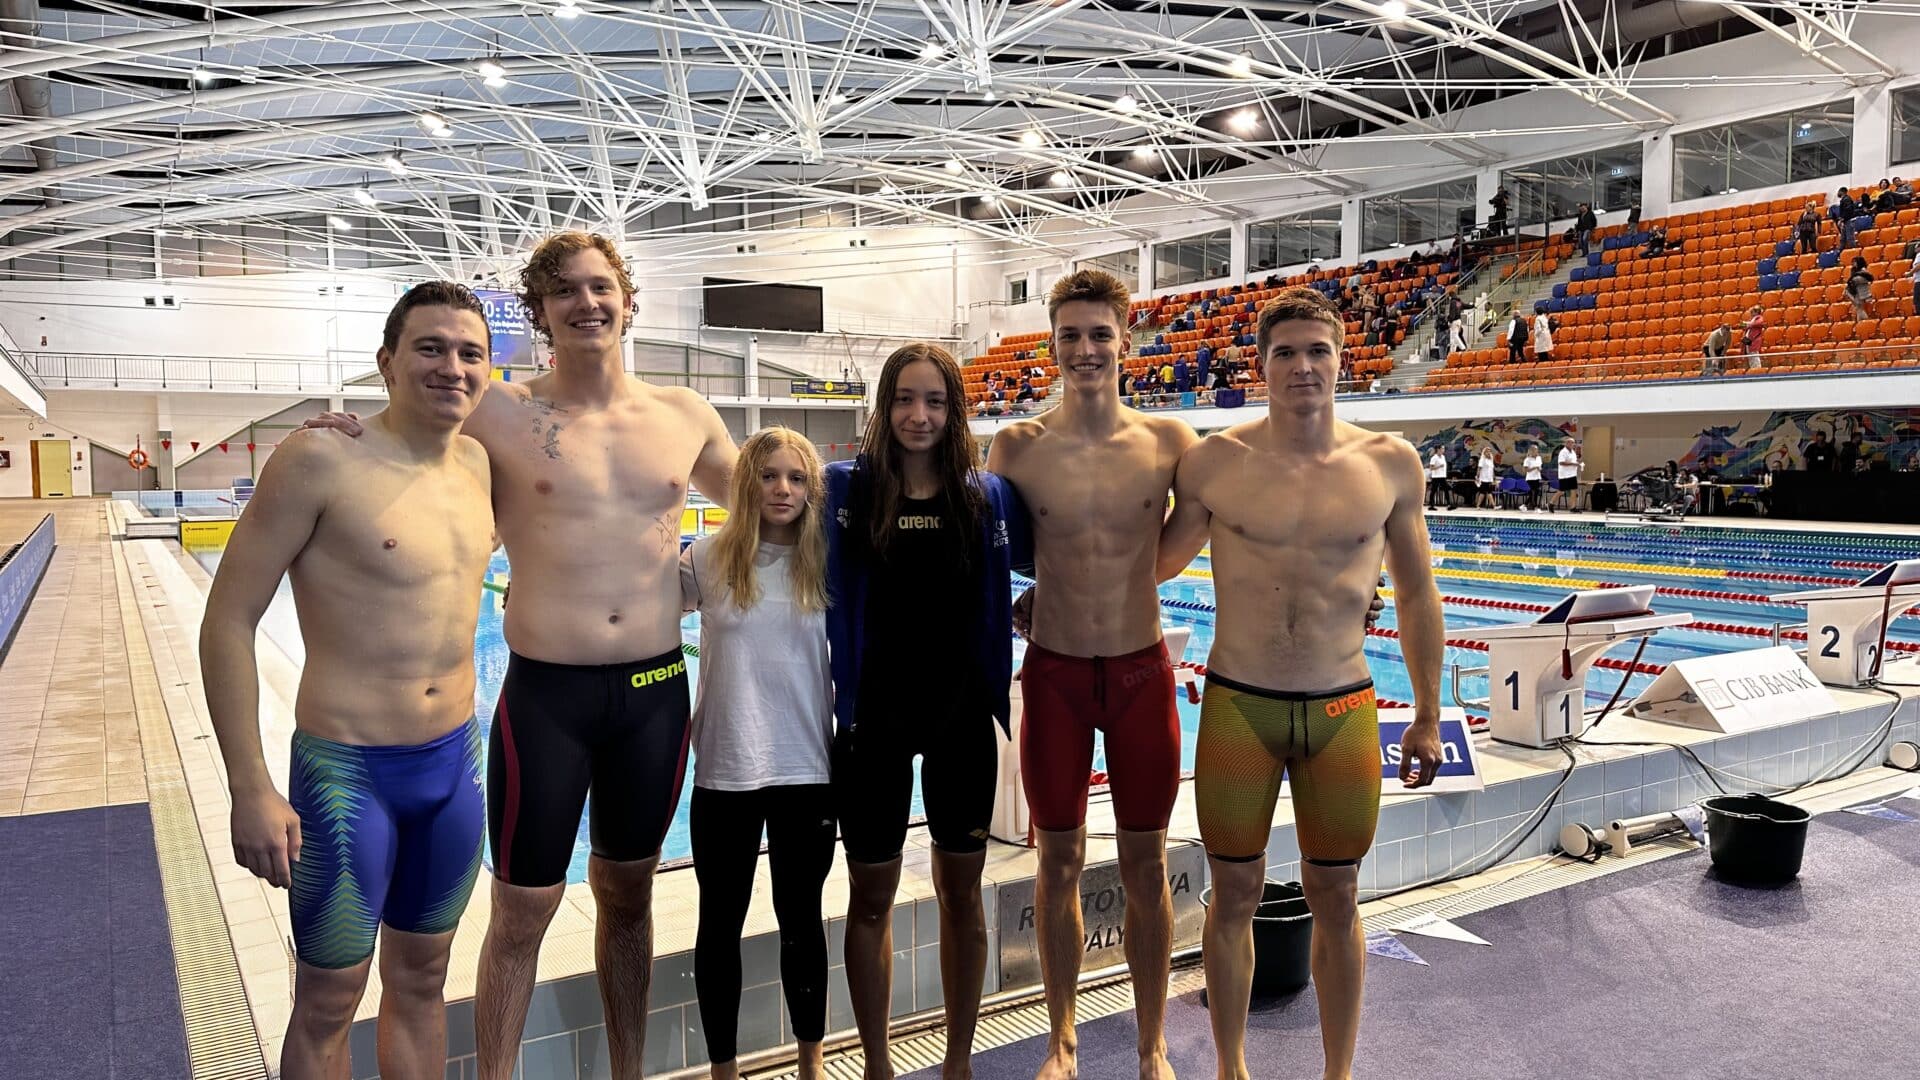 Kecskemét swimmers have performed in Debrecen and Százhalombatta